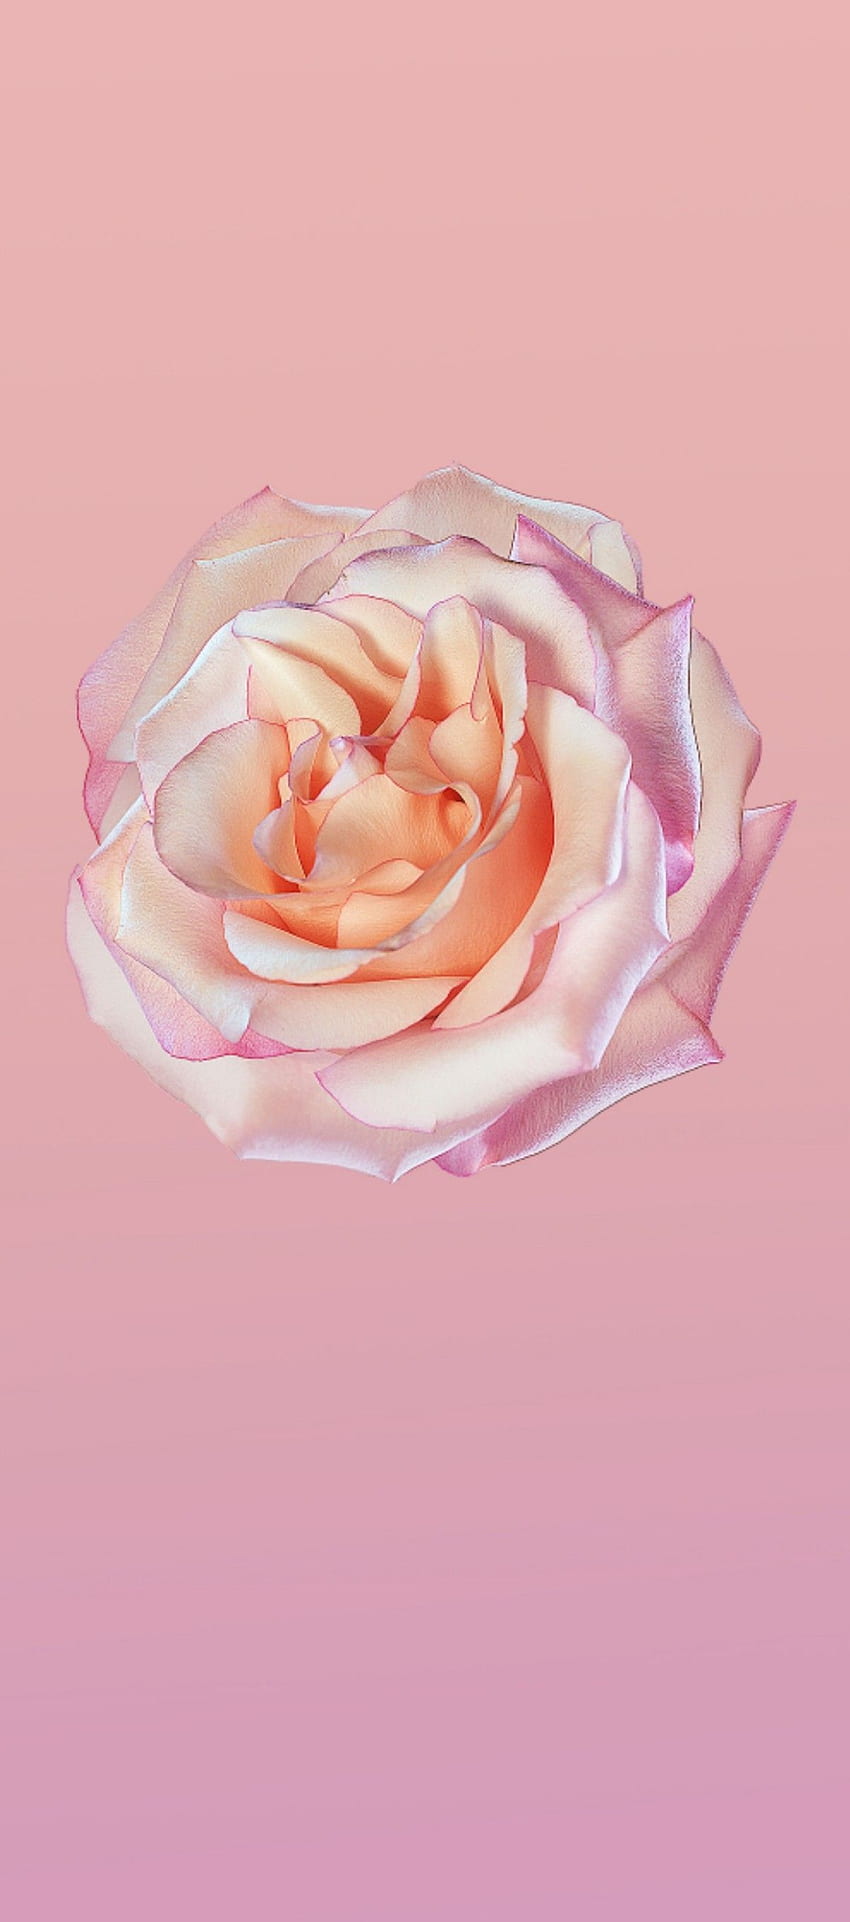 iOS 11, iPhone X, rose, pink, clean, simple, abstract, apple, Clean Aesthetic HD phone wallpaper